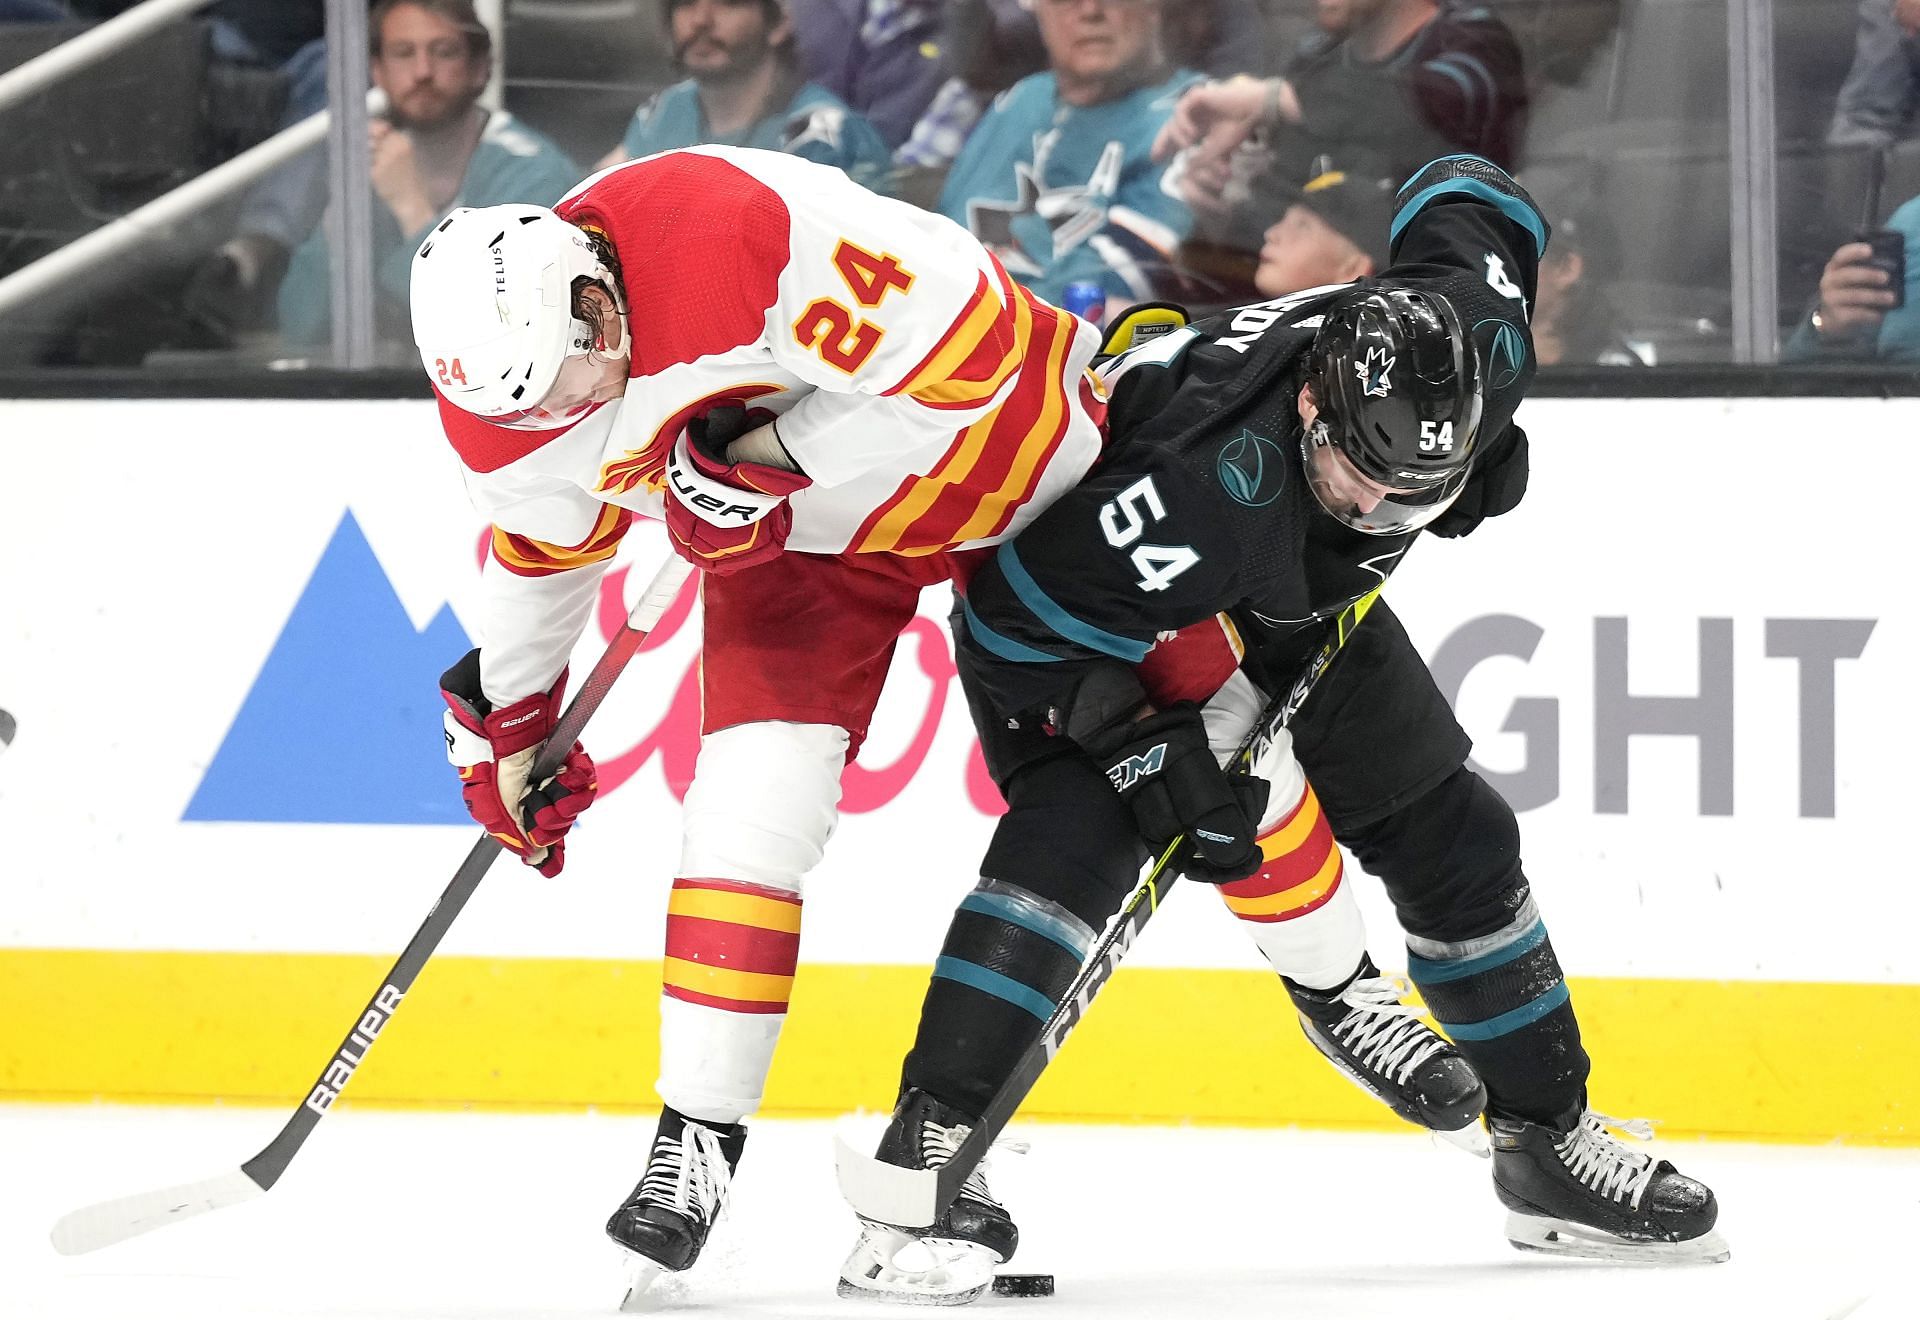 Calgary Flames Vs San Jose Sharks Live Streaming Options How And Where To Watch NHL Live On